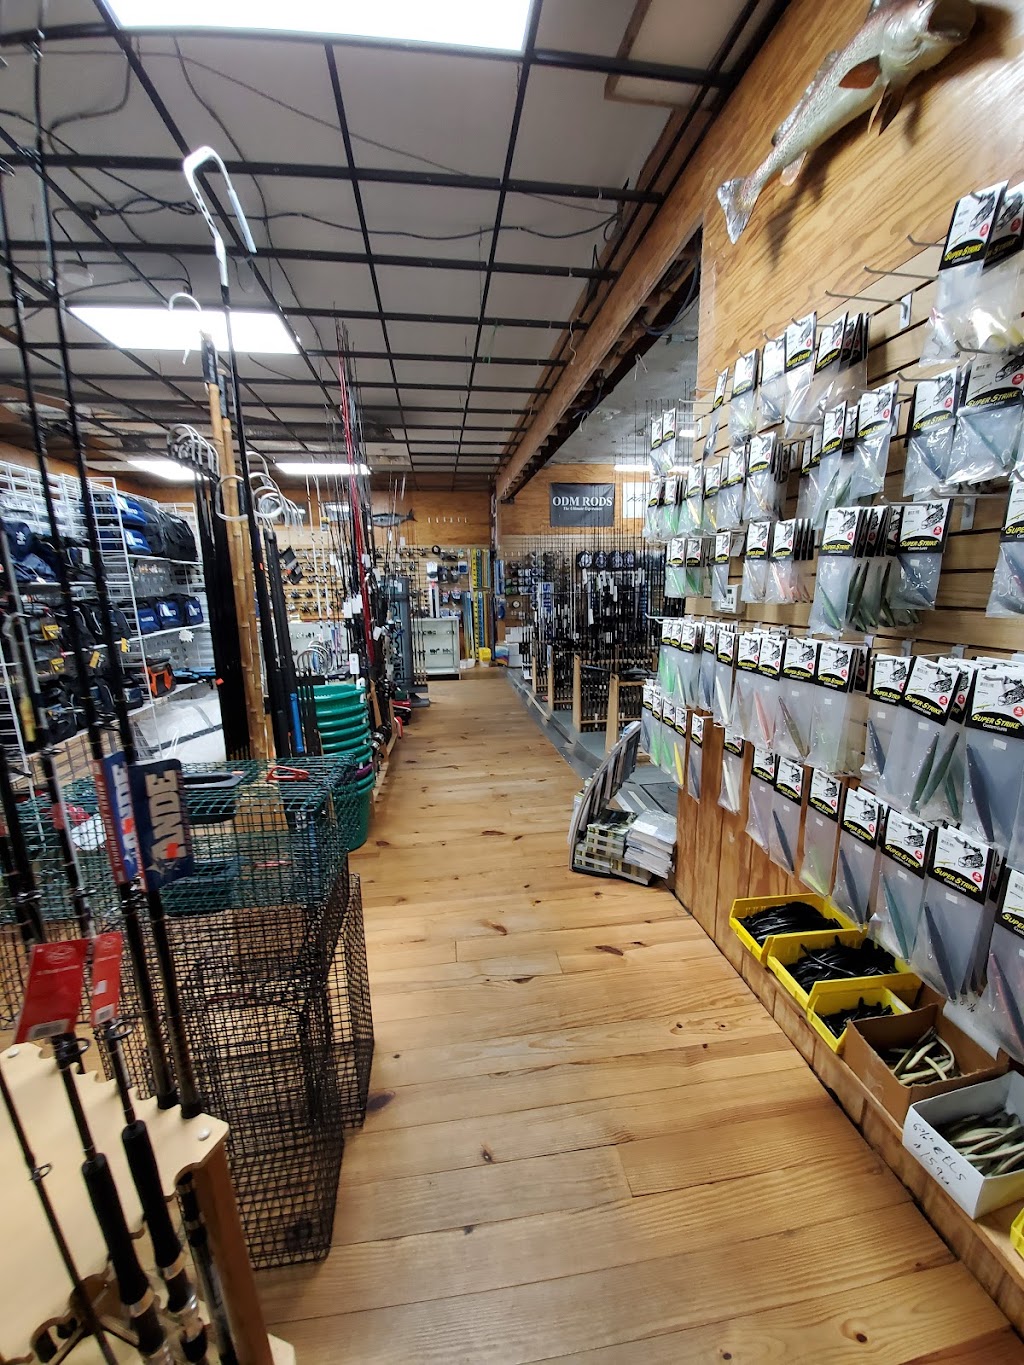 Fishermens Supply Co | Bch, 69 Channel Dr, Point Pleasant Beach, NJ 08742 | Phone: (732) 892-2058